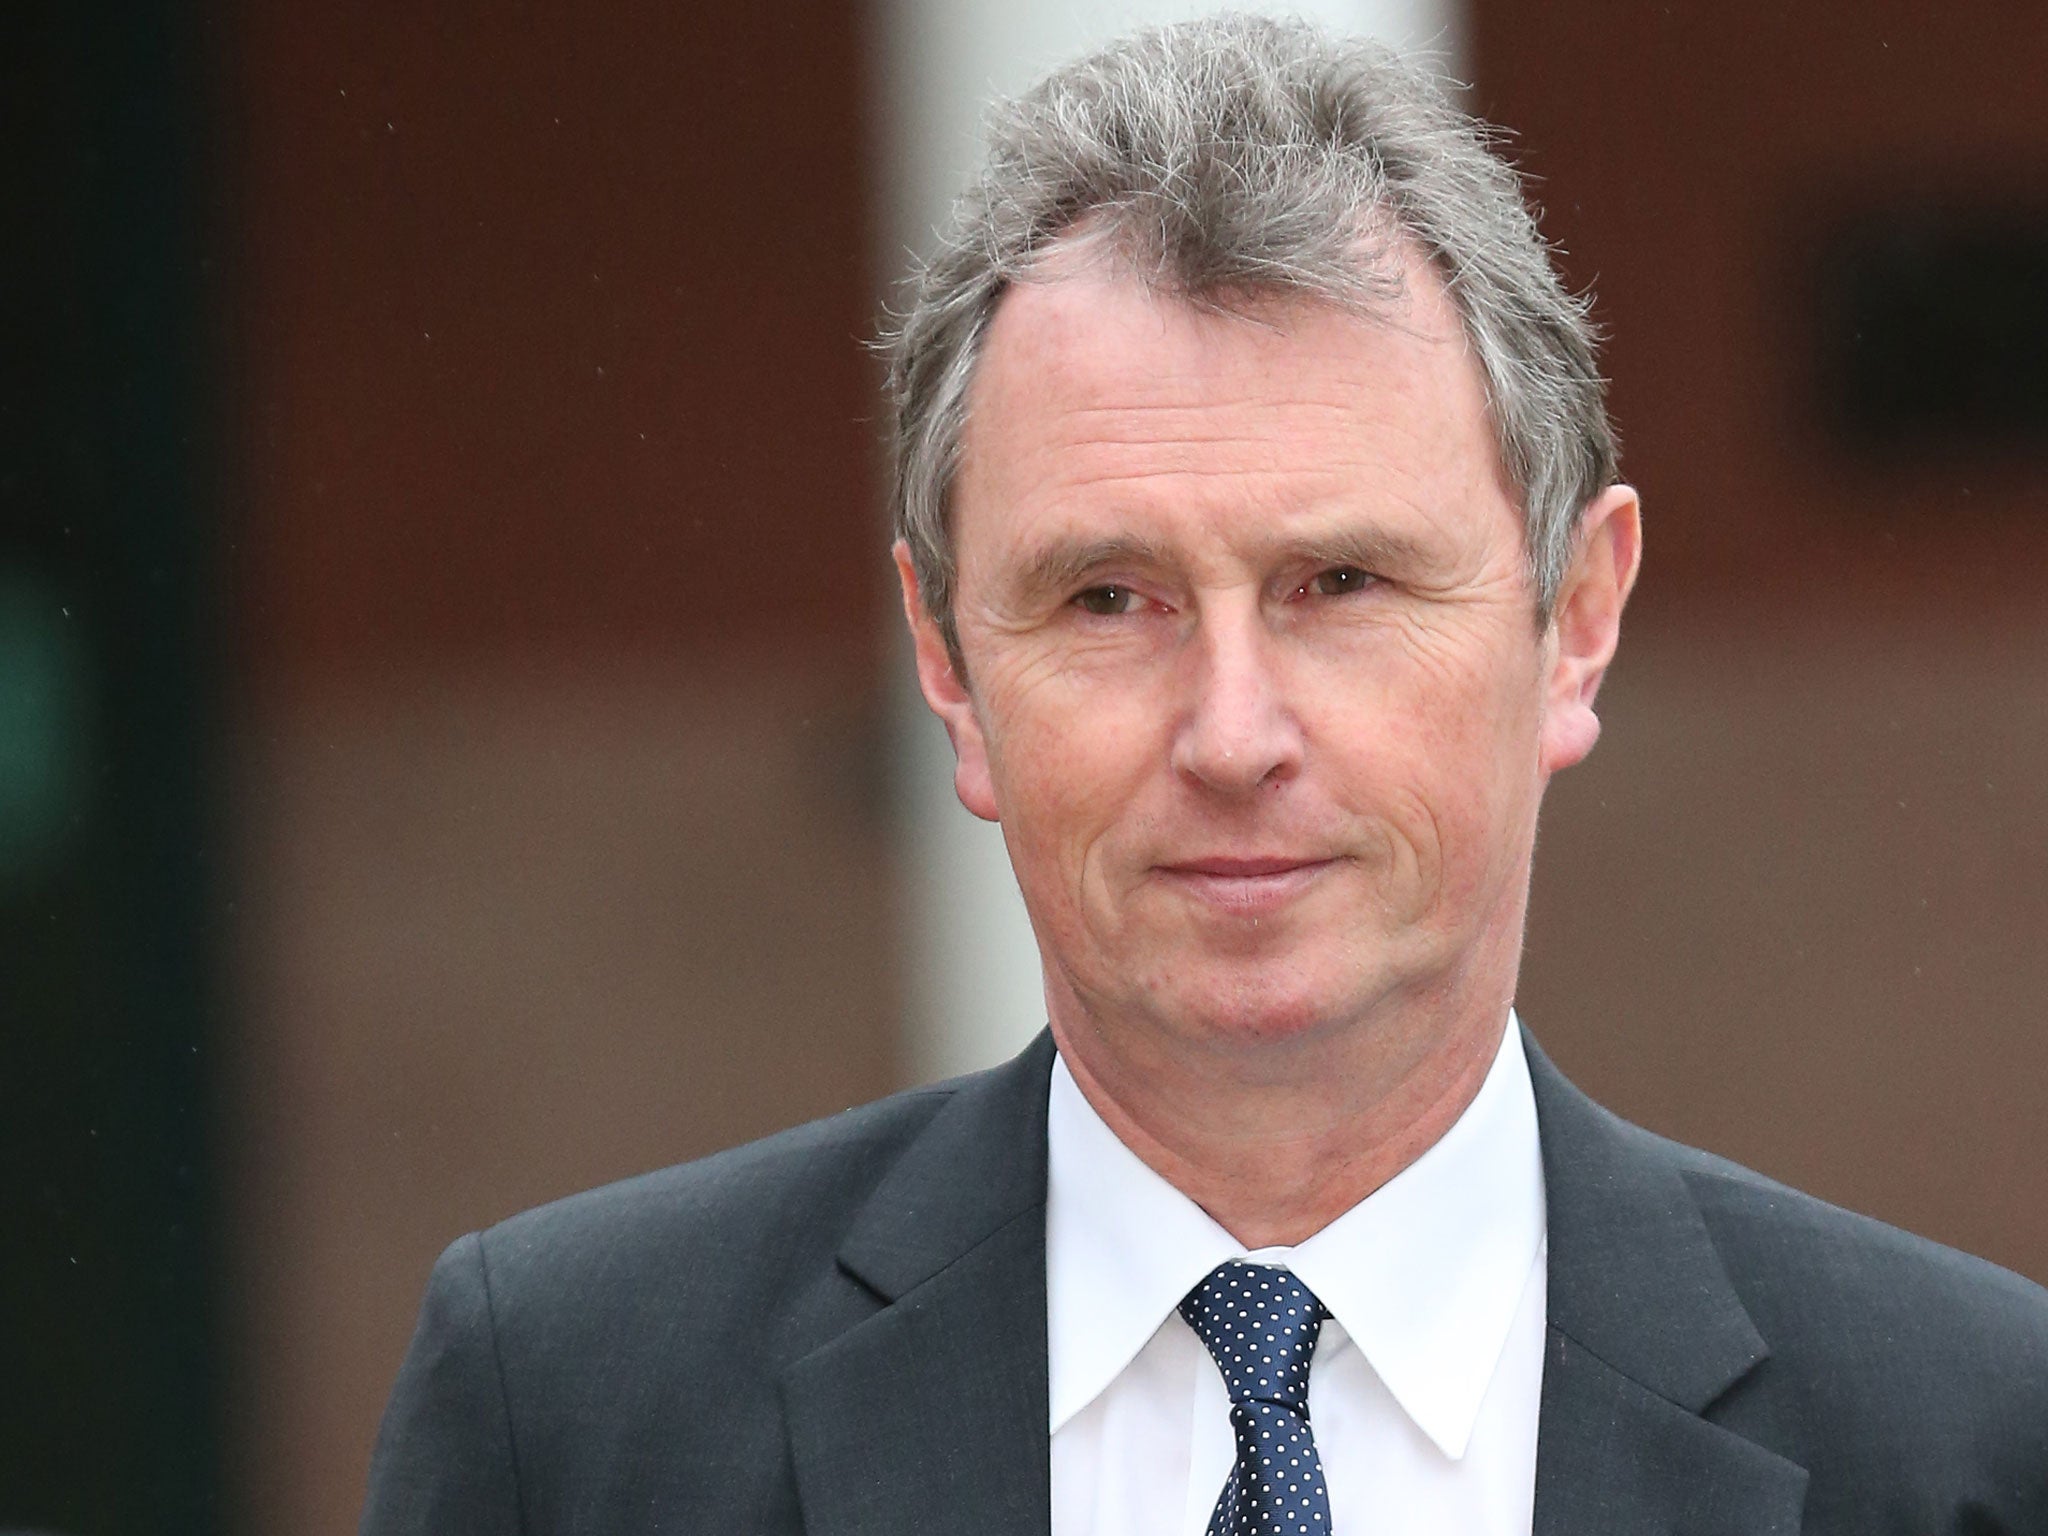 Former Deputy Speaker Nigel Evans leaves Preston Crown Court after his pre-trial hearing to face charges of sexual assault on January 24, 2014 in Preston, Lancashire.